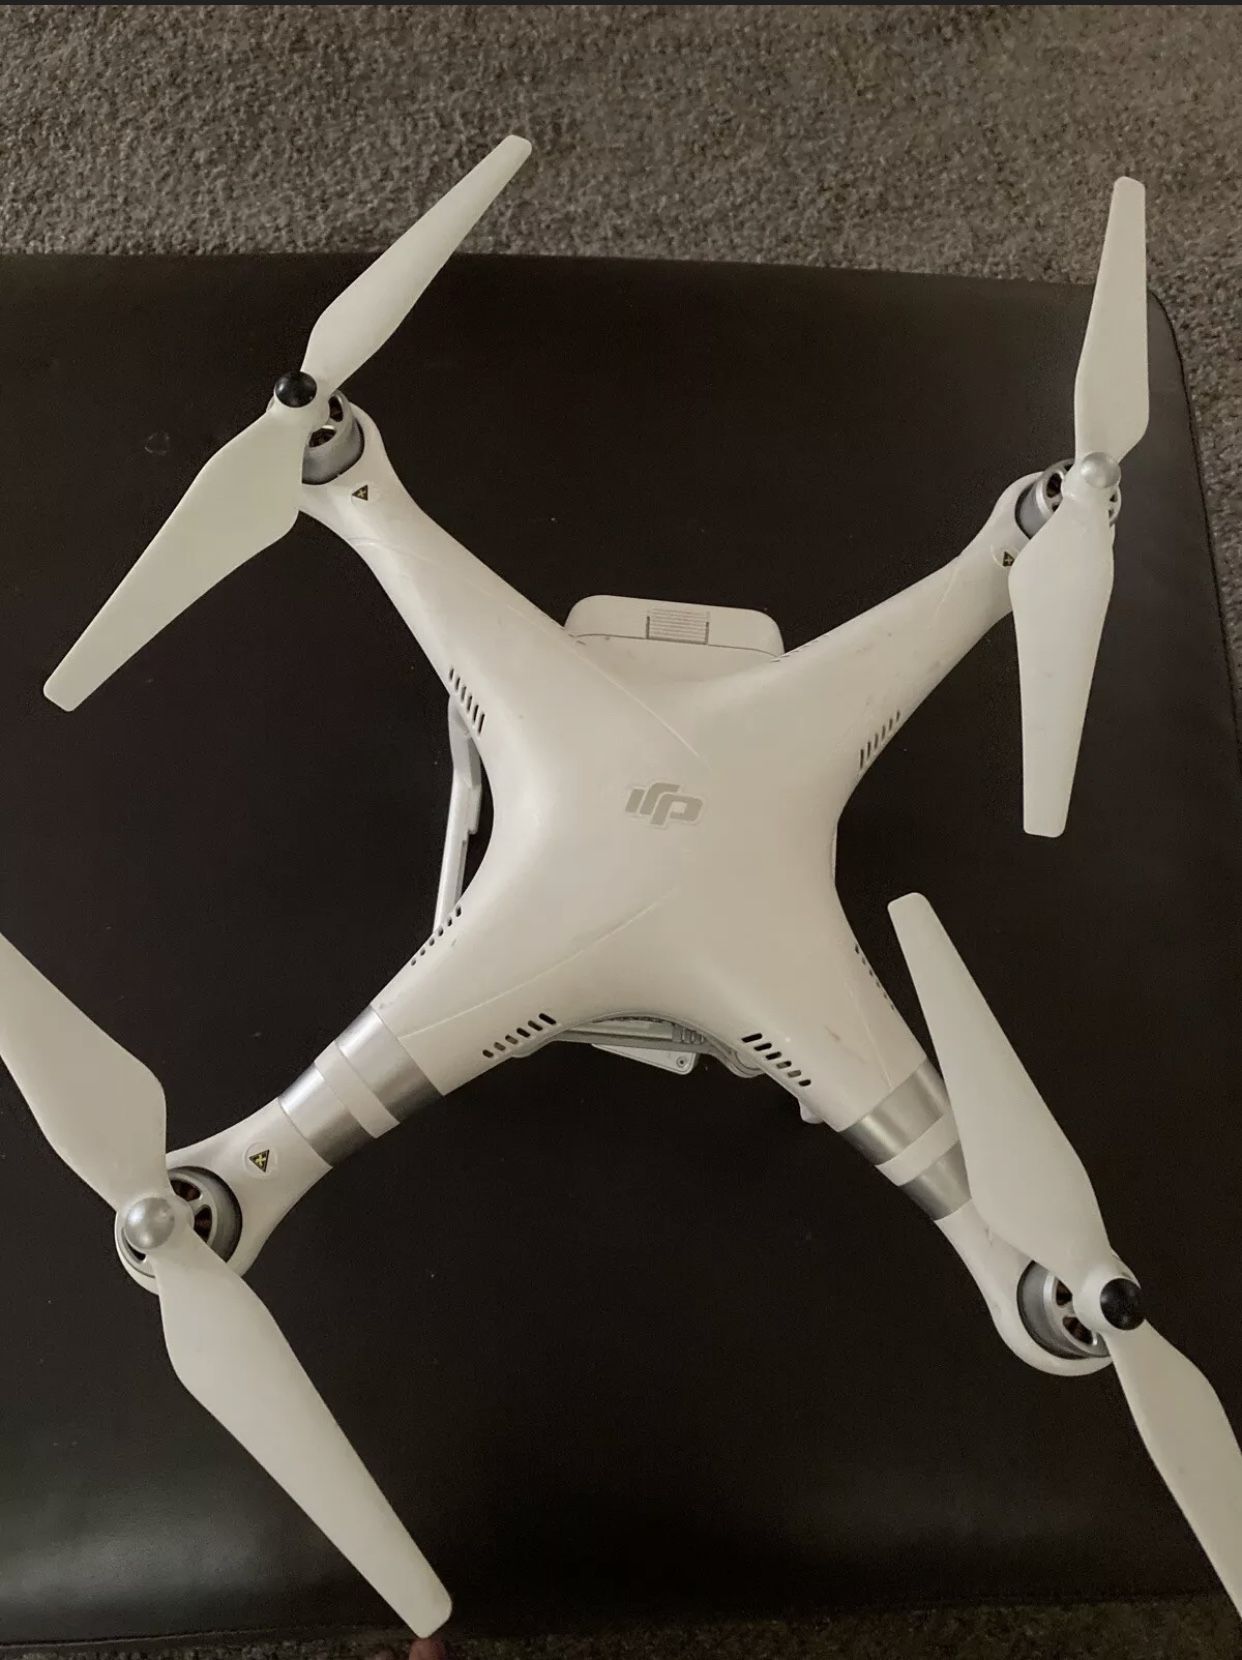 Dji phantom 3 advanced with accessories perfect begginer drone